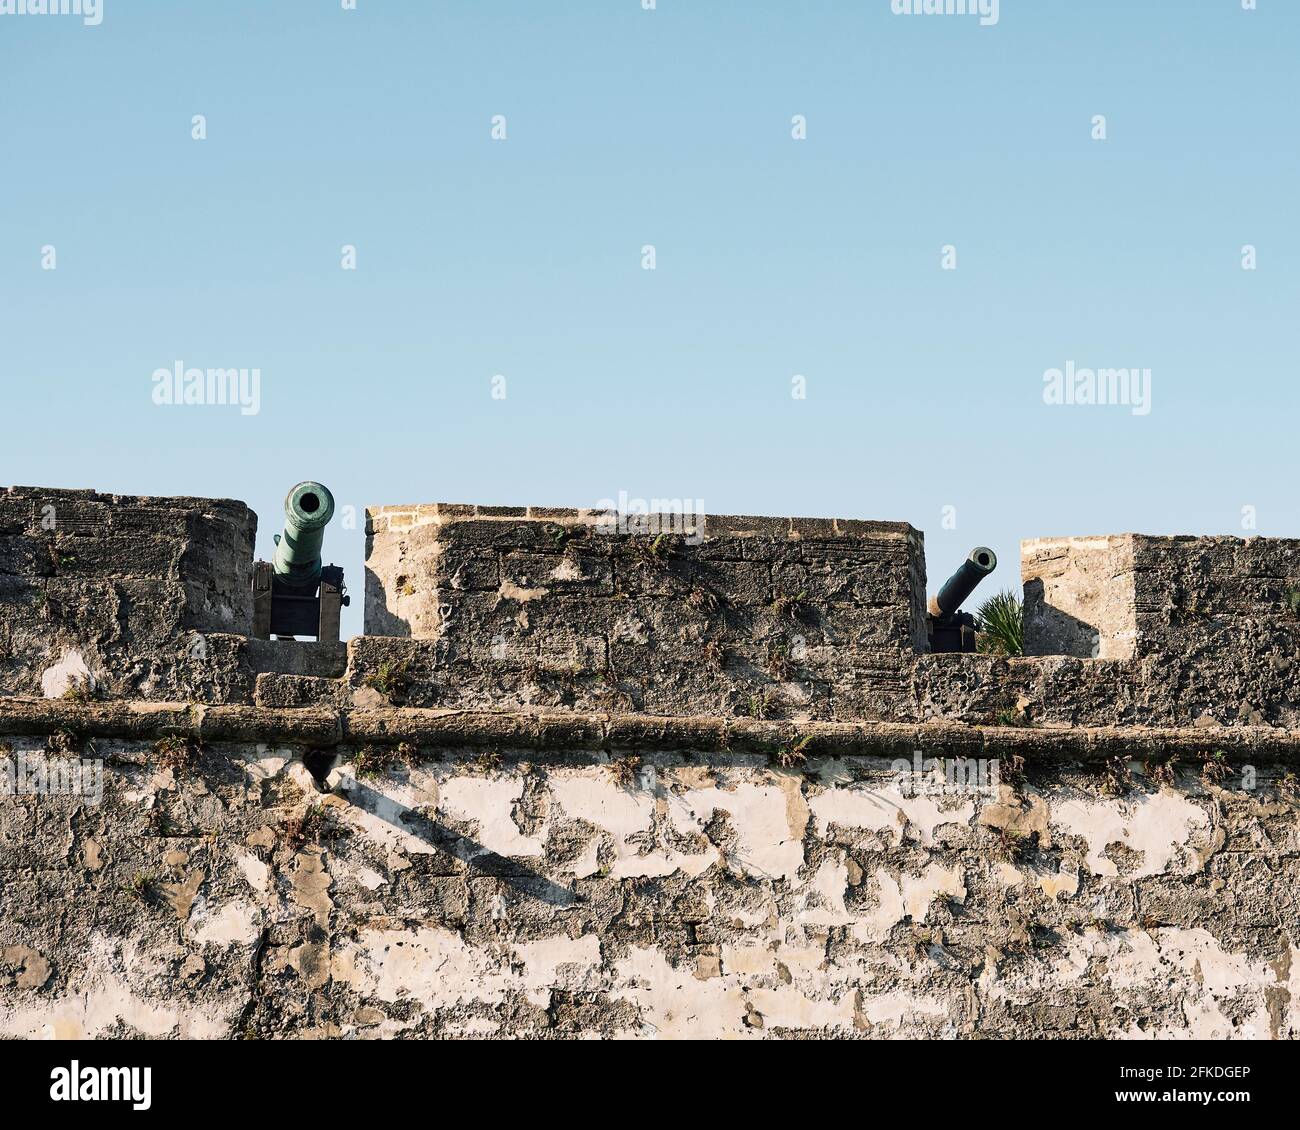 Canons on display along a stone wall of Castillo de San Marcos a 17th Century Spanish fort or fortress in St Augustine Florida, USA. Stock Photo